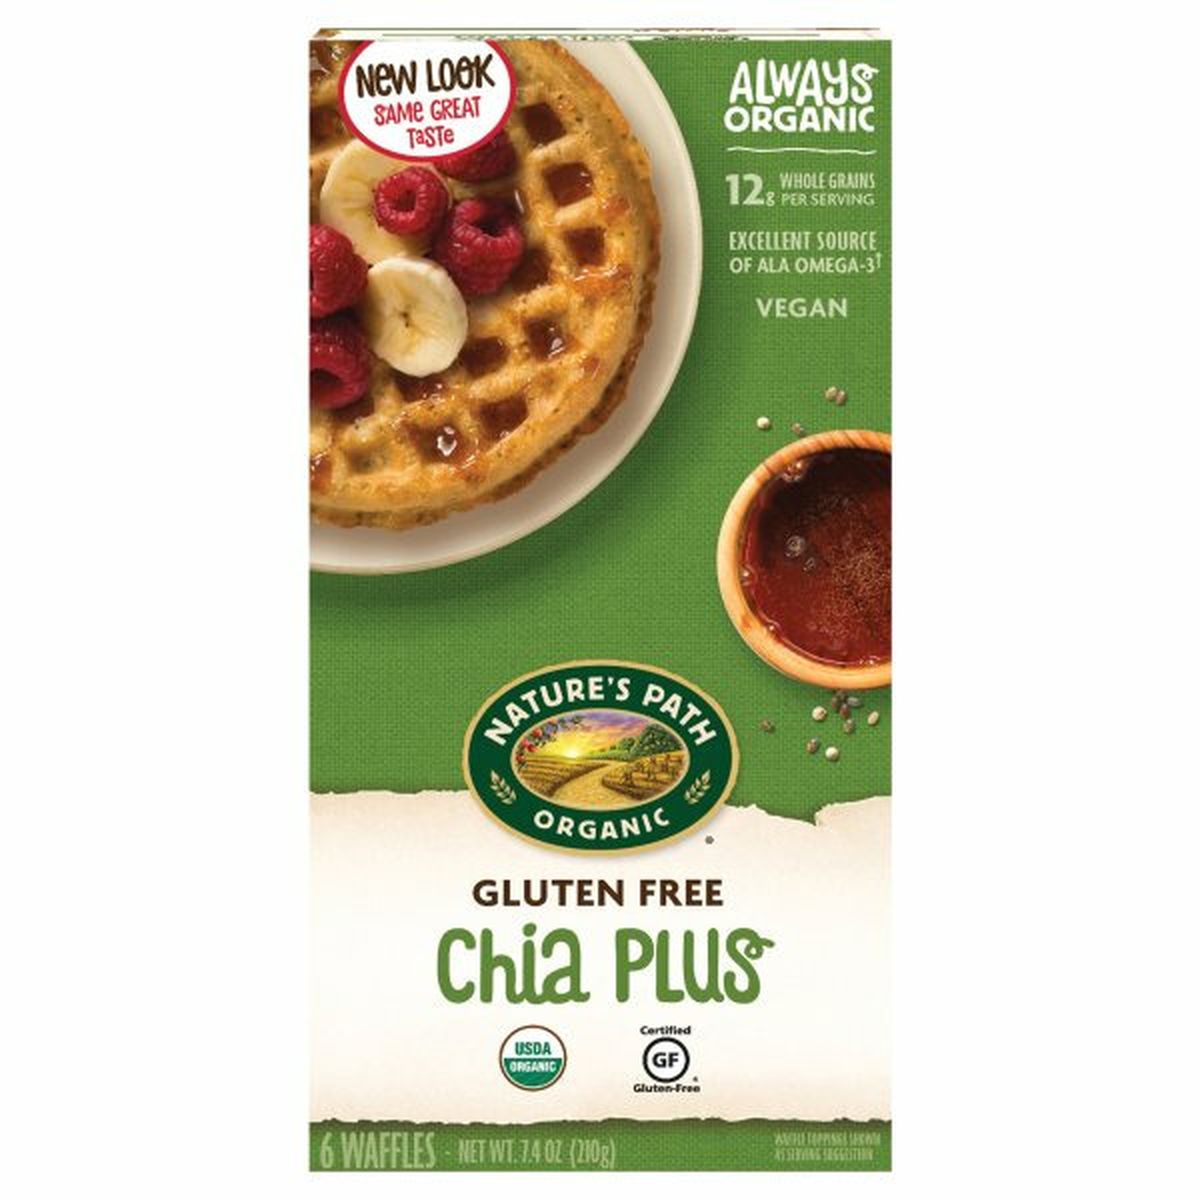 Calories in Nature's Path Waffles, Gluten Free, Chia Plus